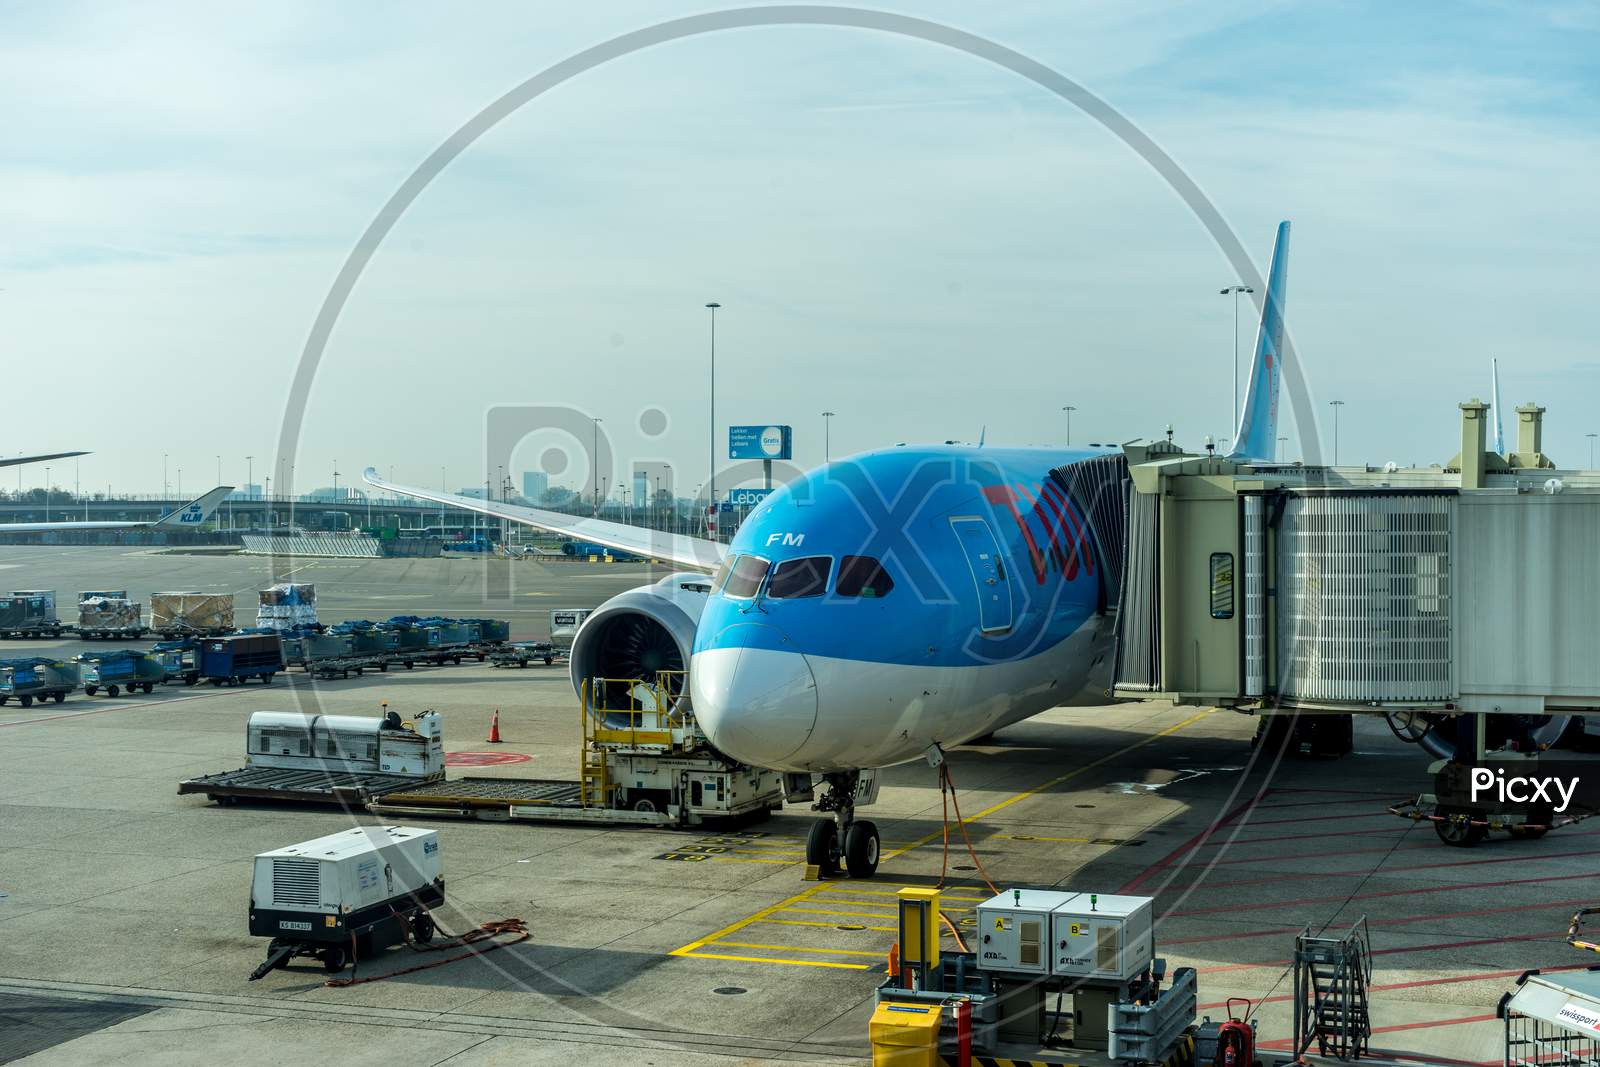 Schiphol, Amsterdam, Netherlands - 4 November 2018 : Tui And Klm Planes Waiting At The Airport Dock